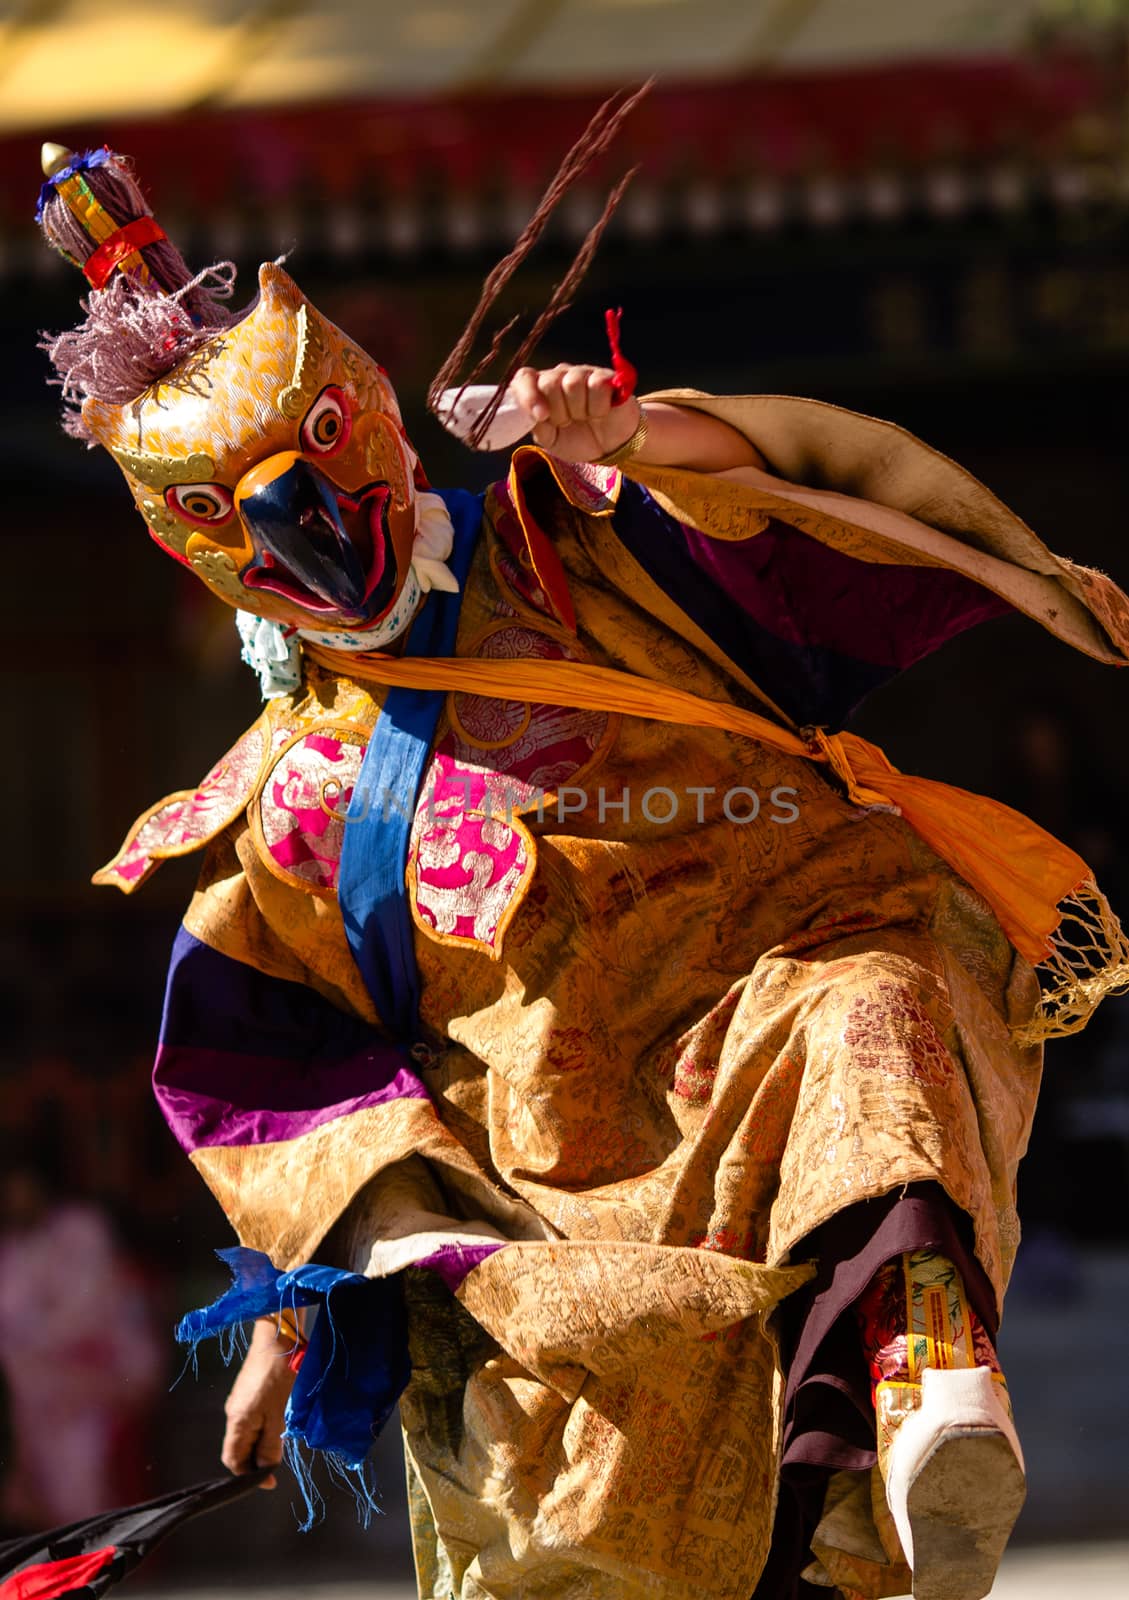 Sikkim, INDIA - Dec 22, 2011: unidentified monk performs a religious mask dance during the Cham Dance Festival on Dec 22, 2011 in Sikkim, India.